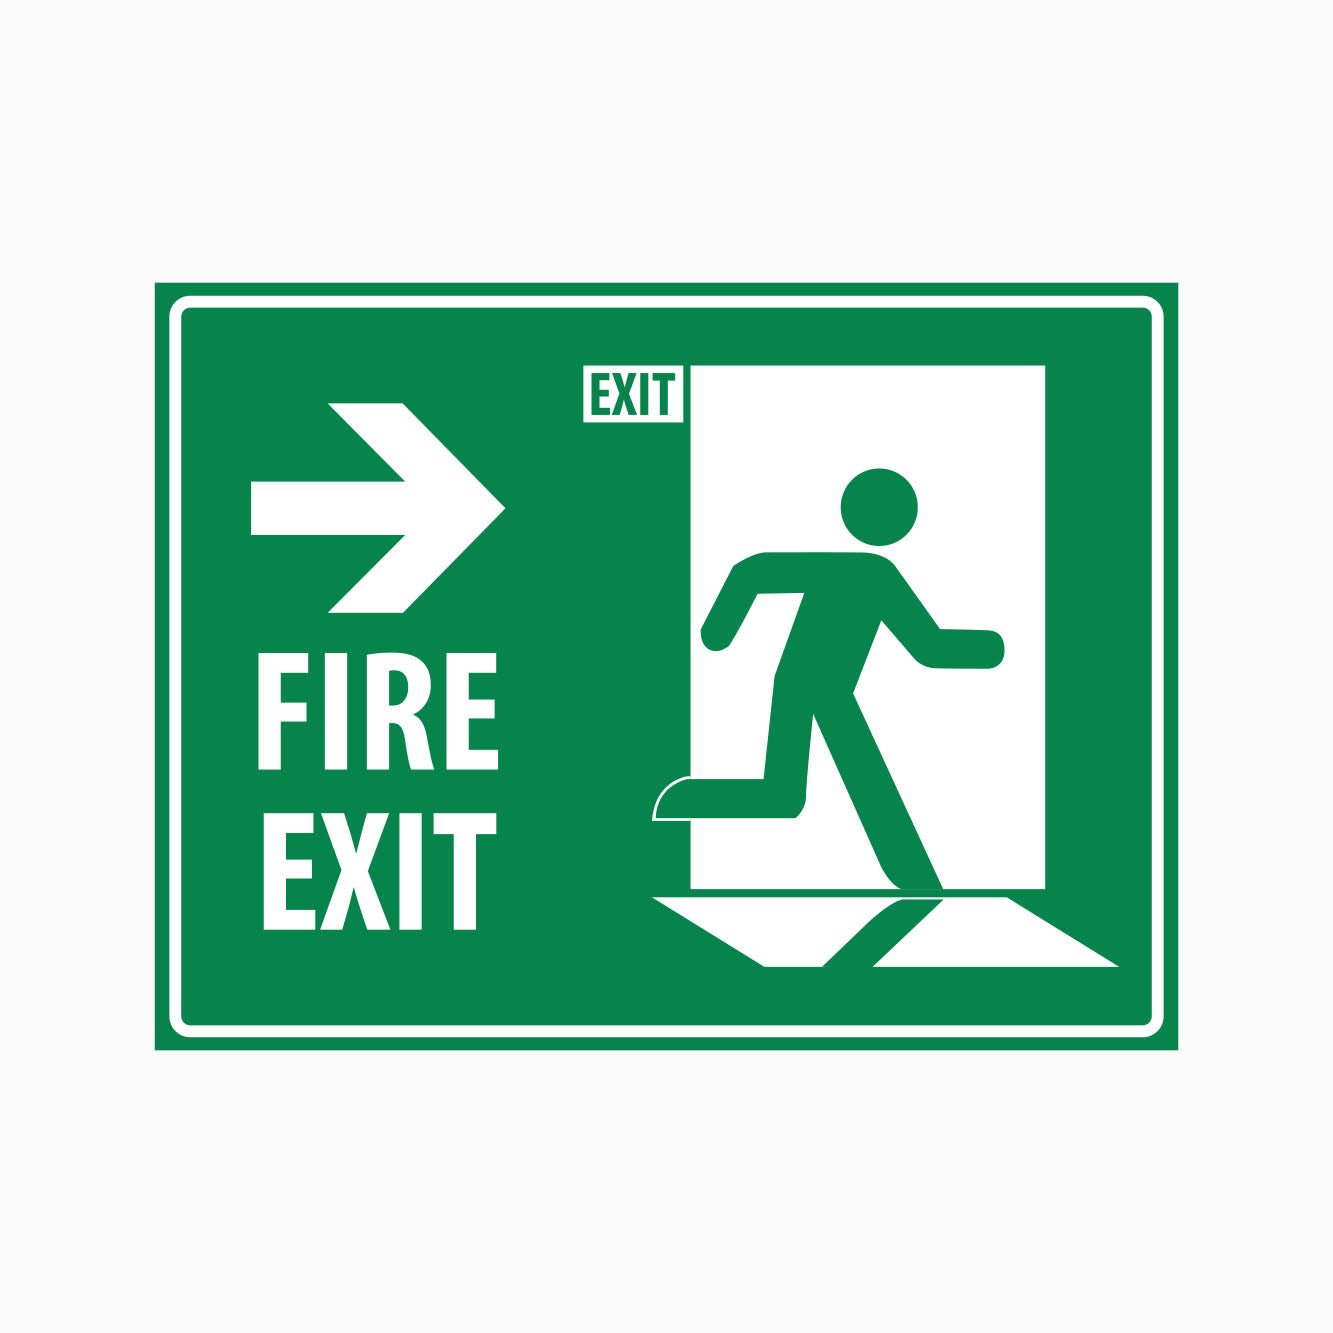 FIRE EXIT SIGN - Right Arrow - GET SIGNS